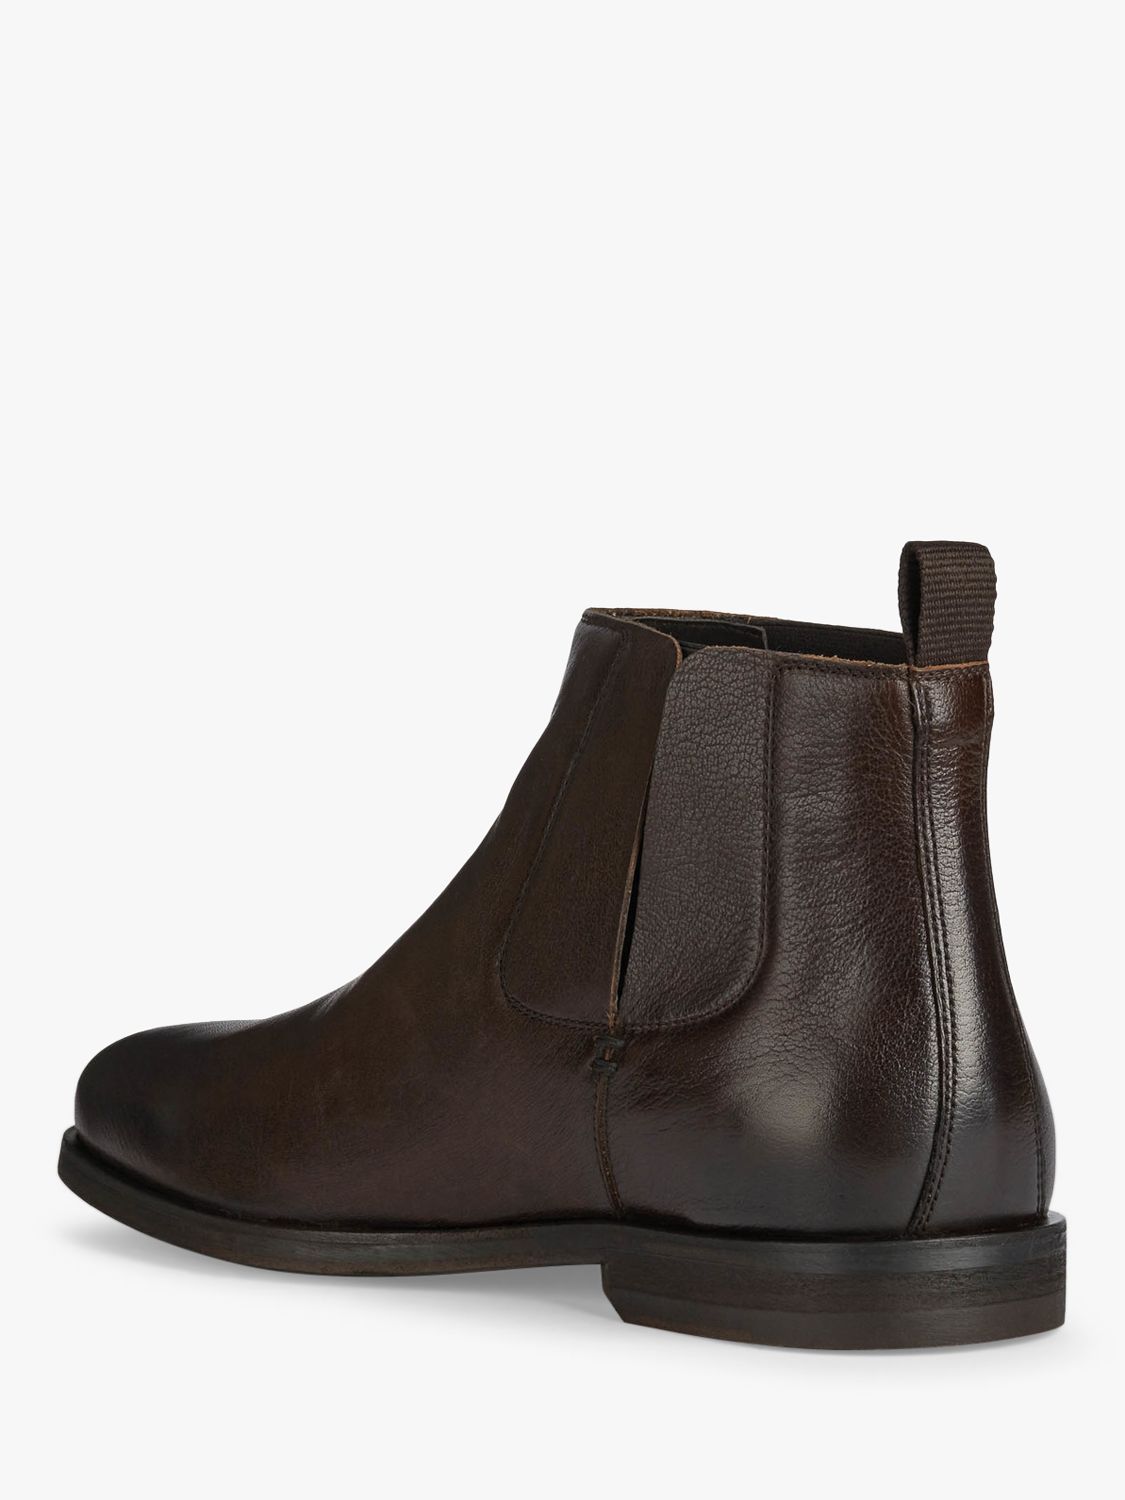 Geox Bayle Leather Chelsea Boots, Coffee